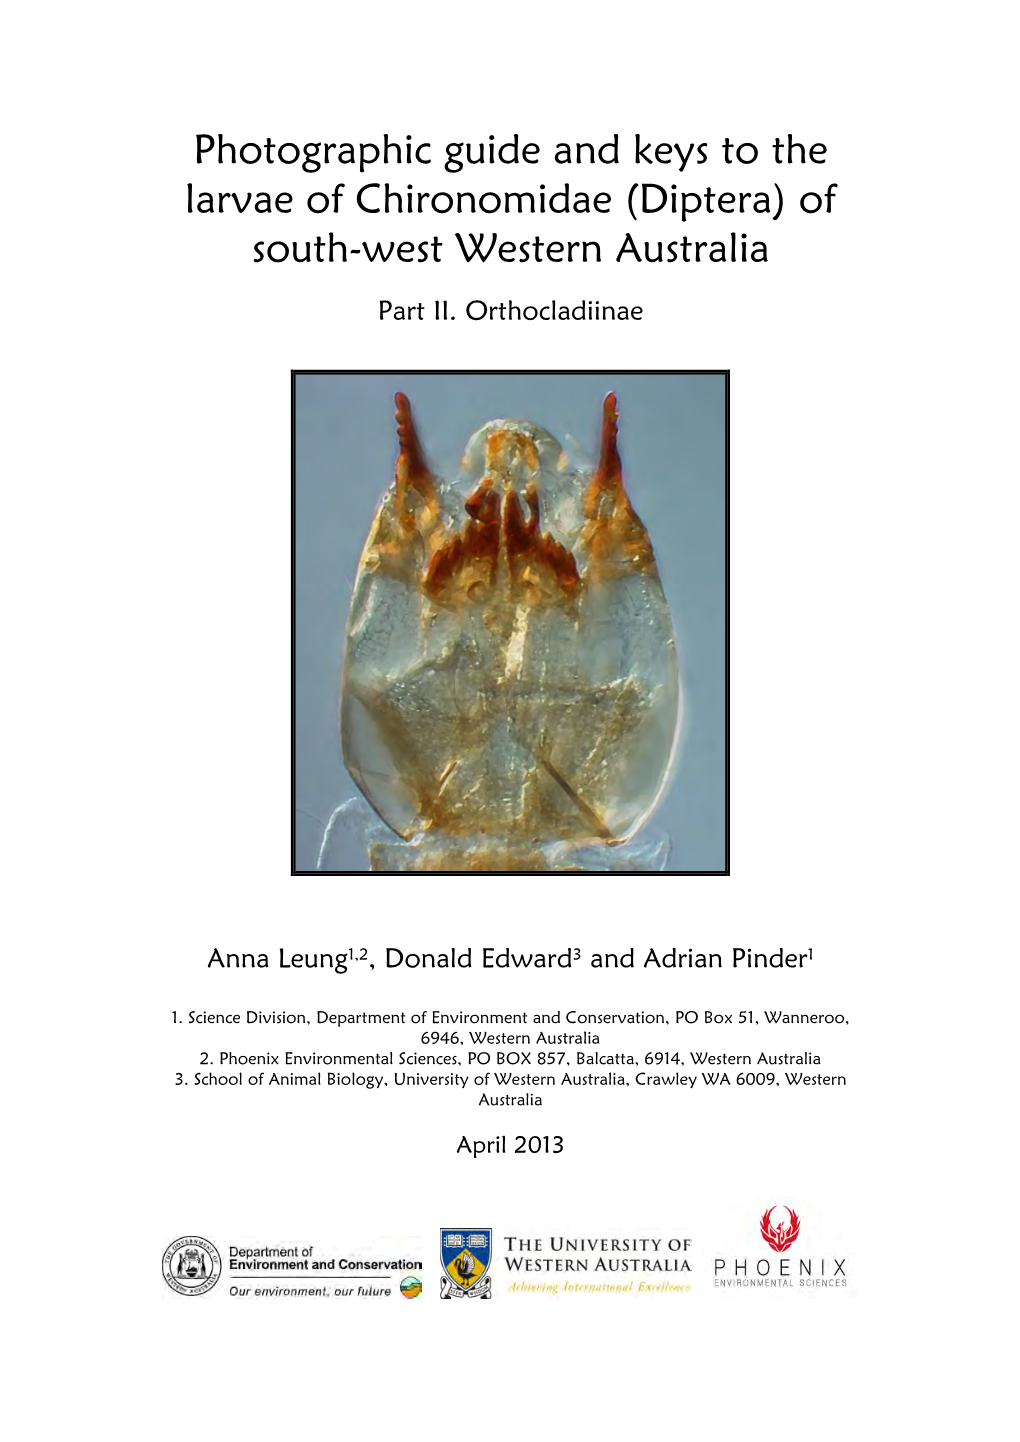 Photographic Guide and Keys to the Larvae of Chironomidae (Diptera) of South-West Western Australia